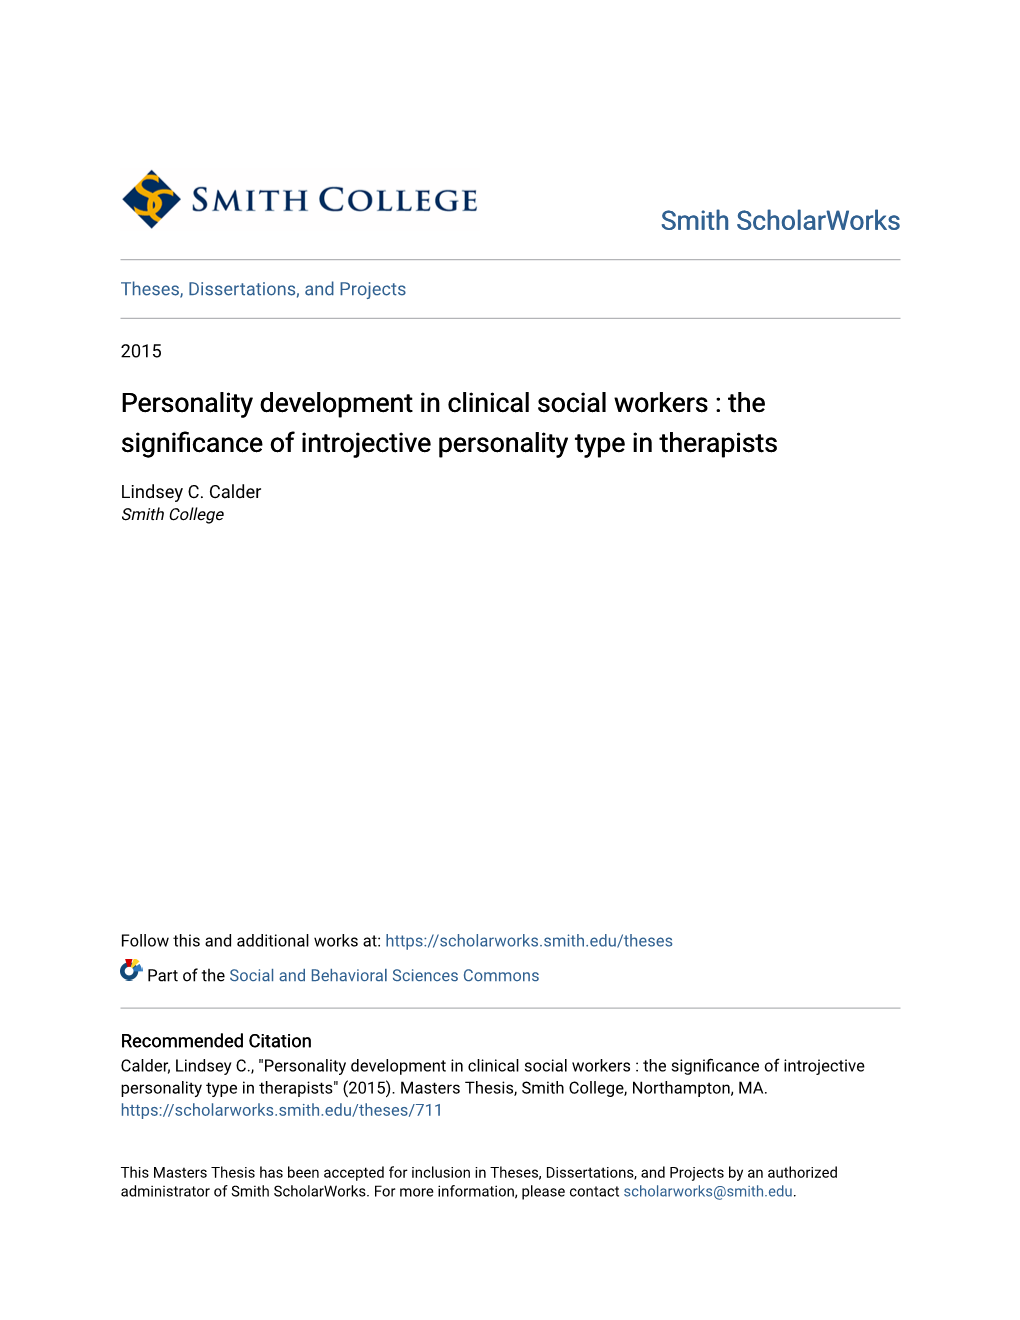 Personality Development in Clinical Social Workers : the Significance of Introjective Personality Type in Therapists